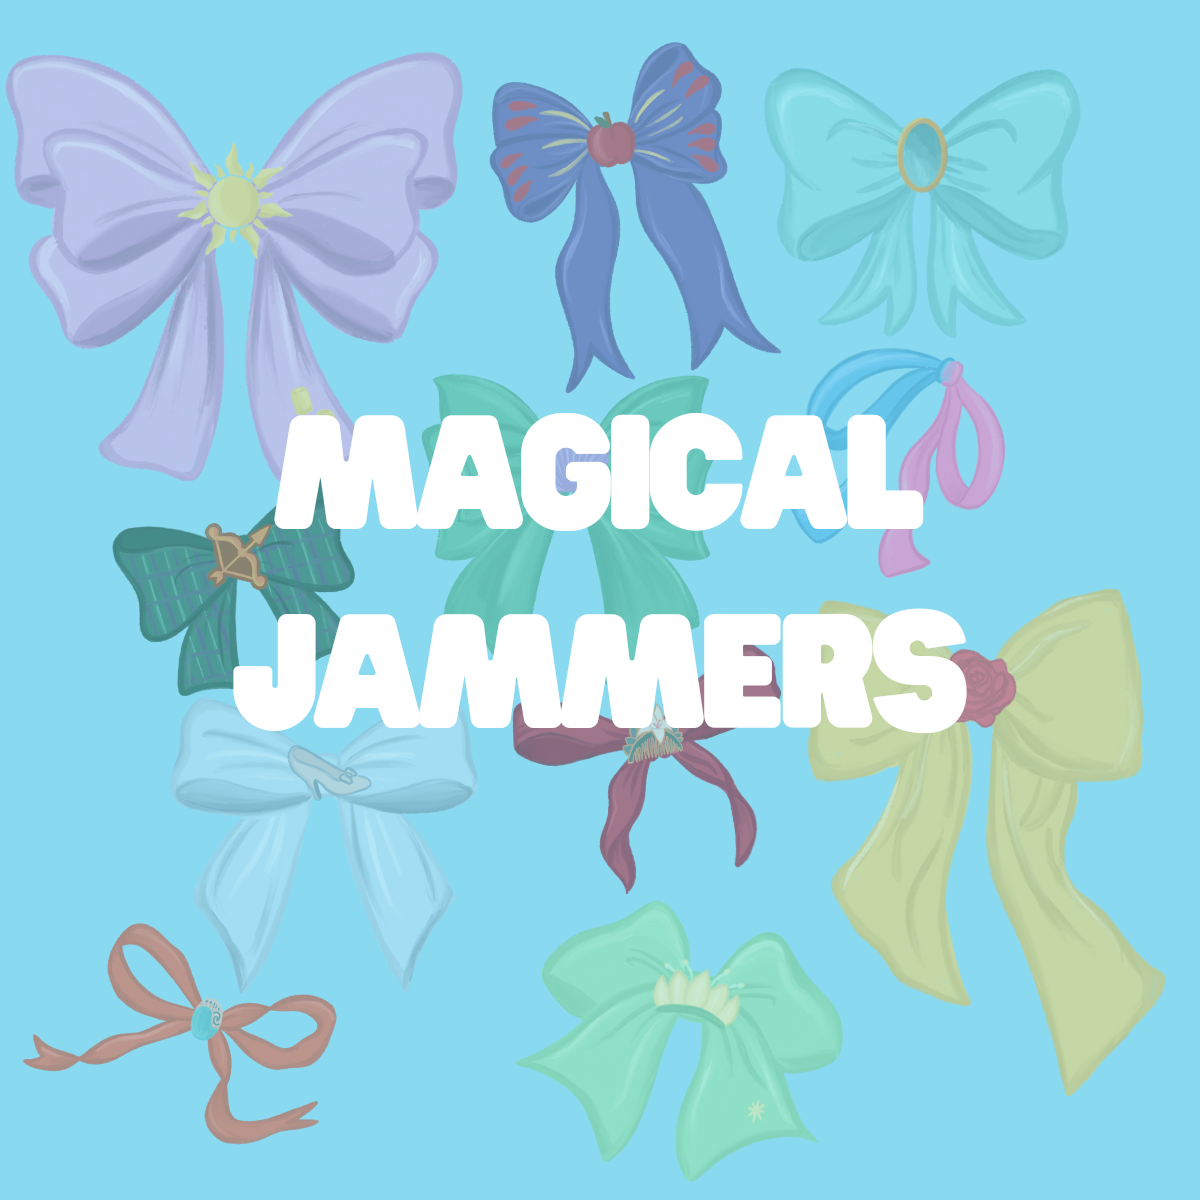 MAGICAL JAMMERS